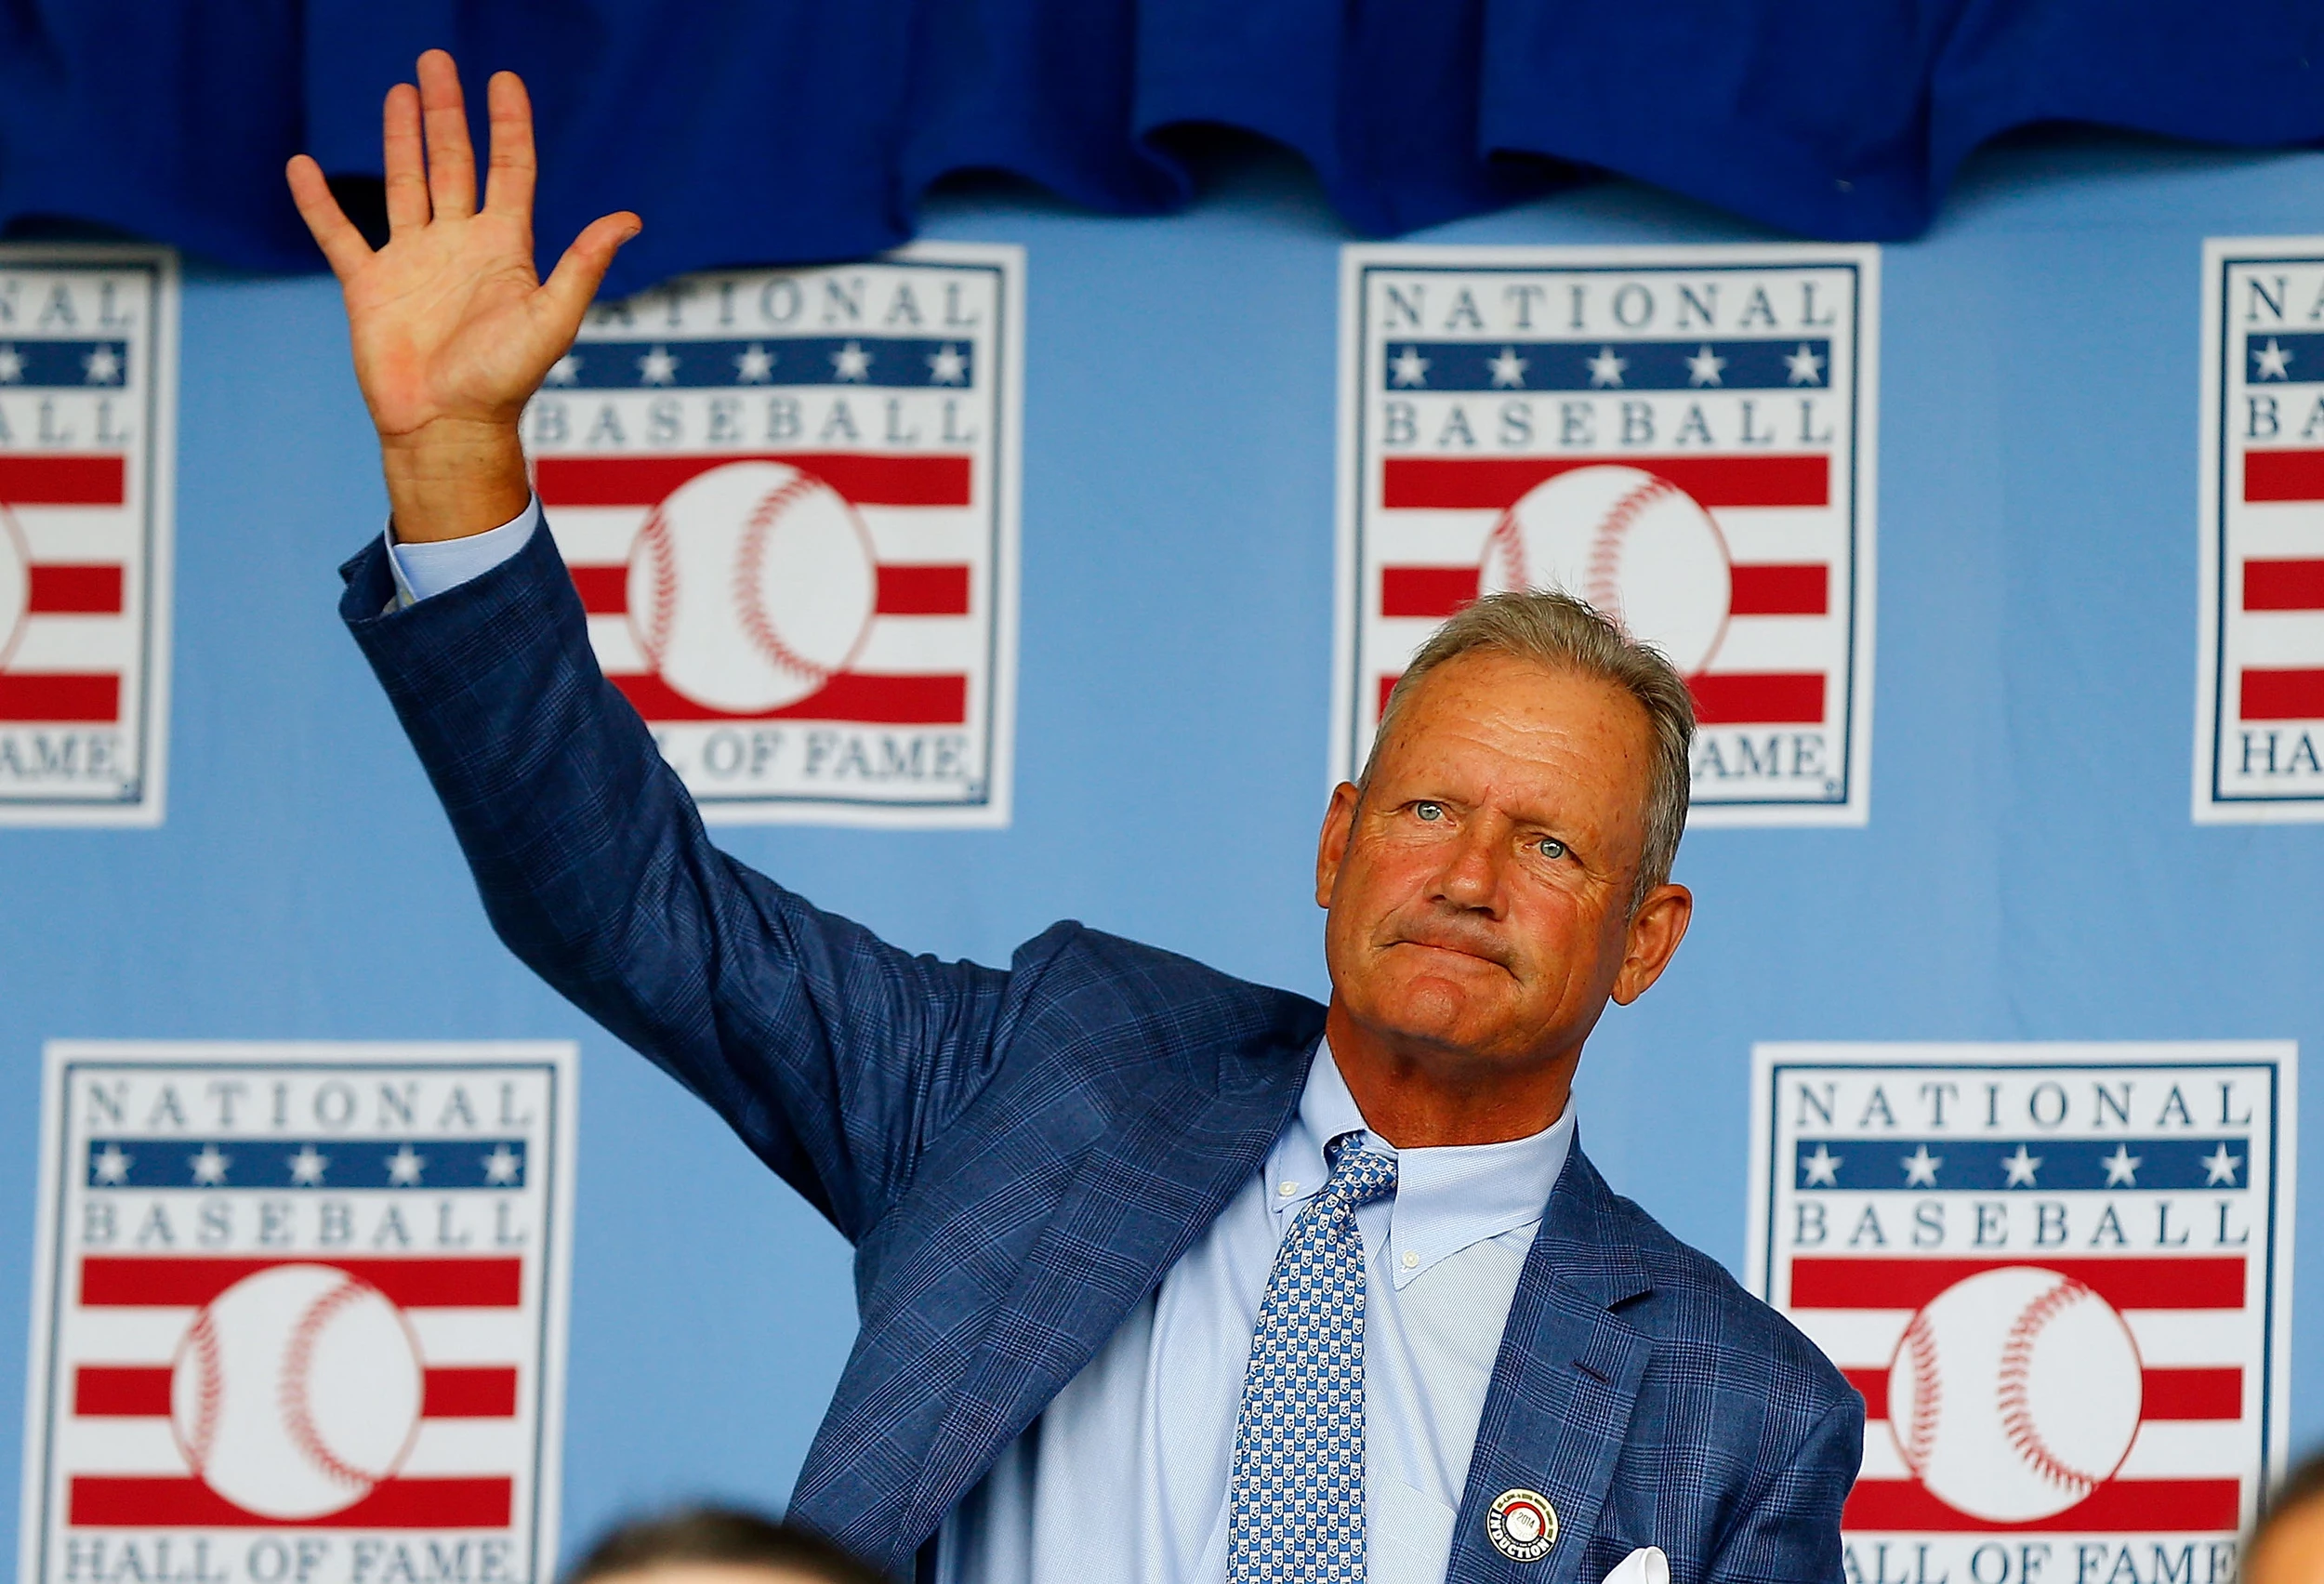 George Brett, current Royals players show off the powder blues